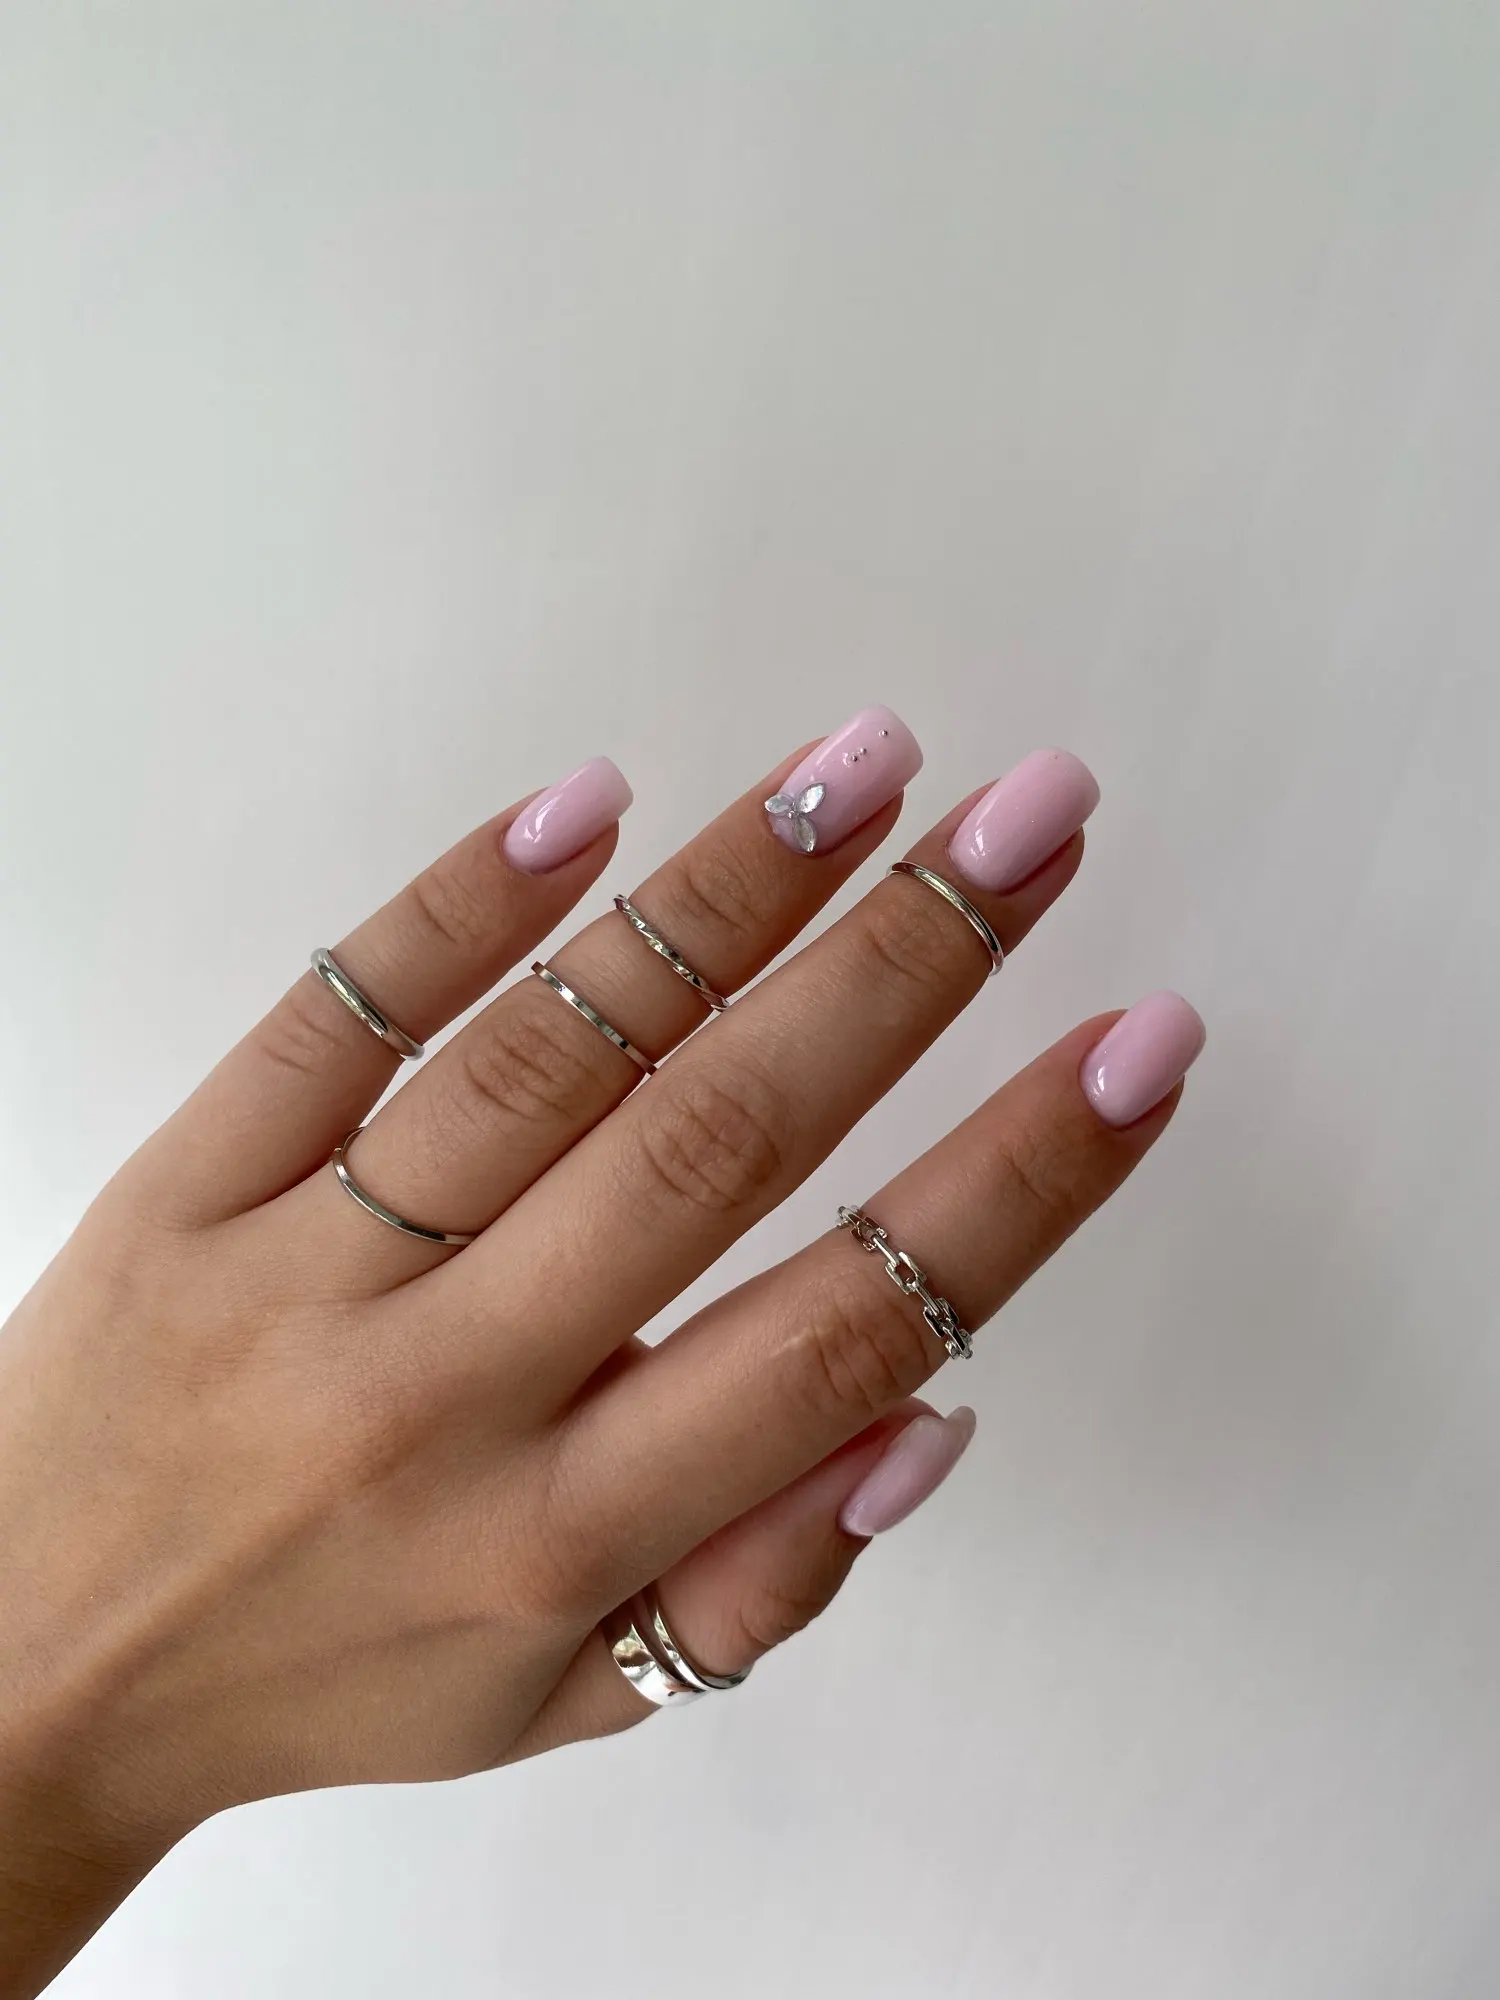 Fashion Jewelry Rings Set Hot Selling Metal Alloy Hollow Round Opening Women Finger Ring For Girl Lady Party Wedding Gifts